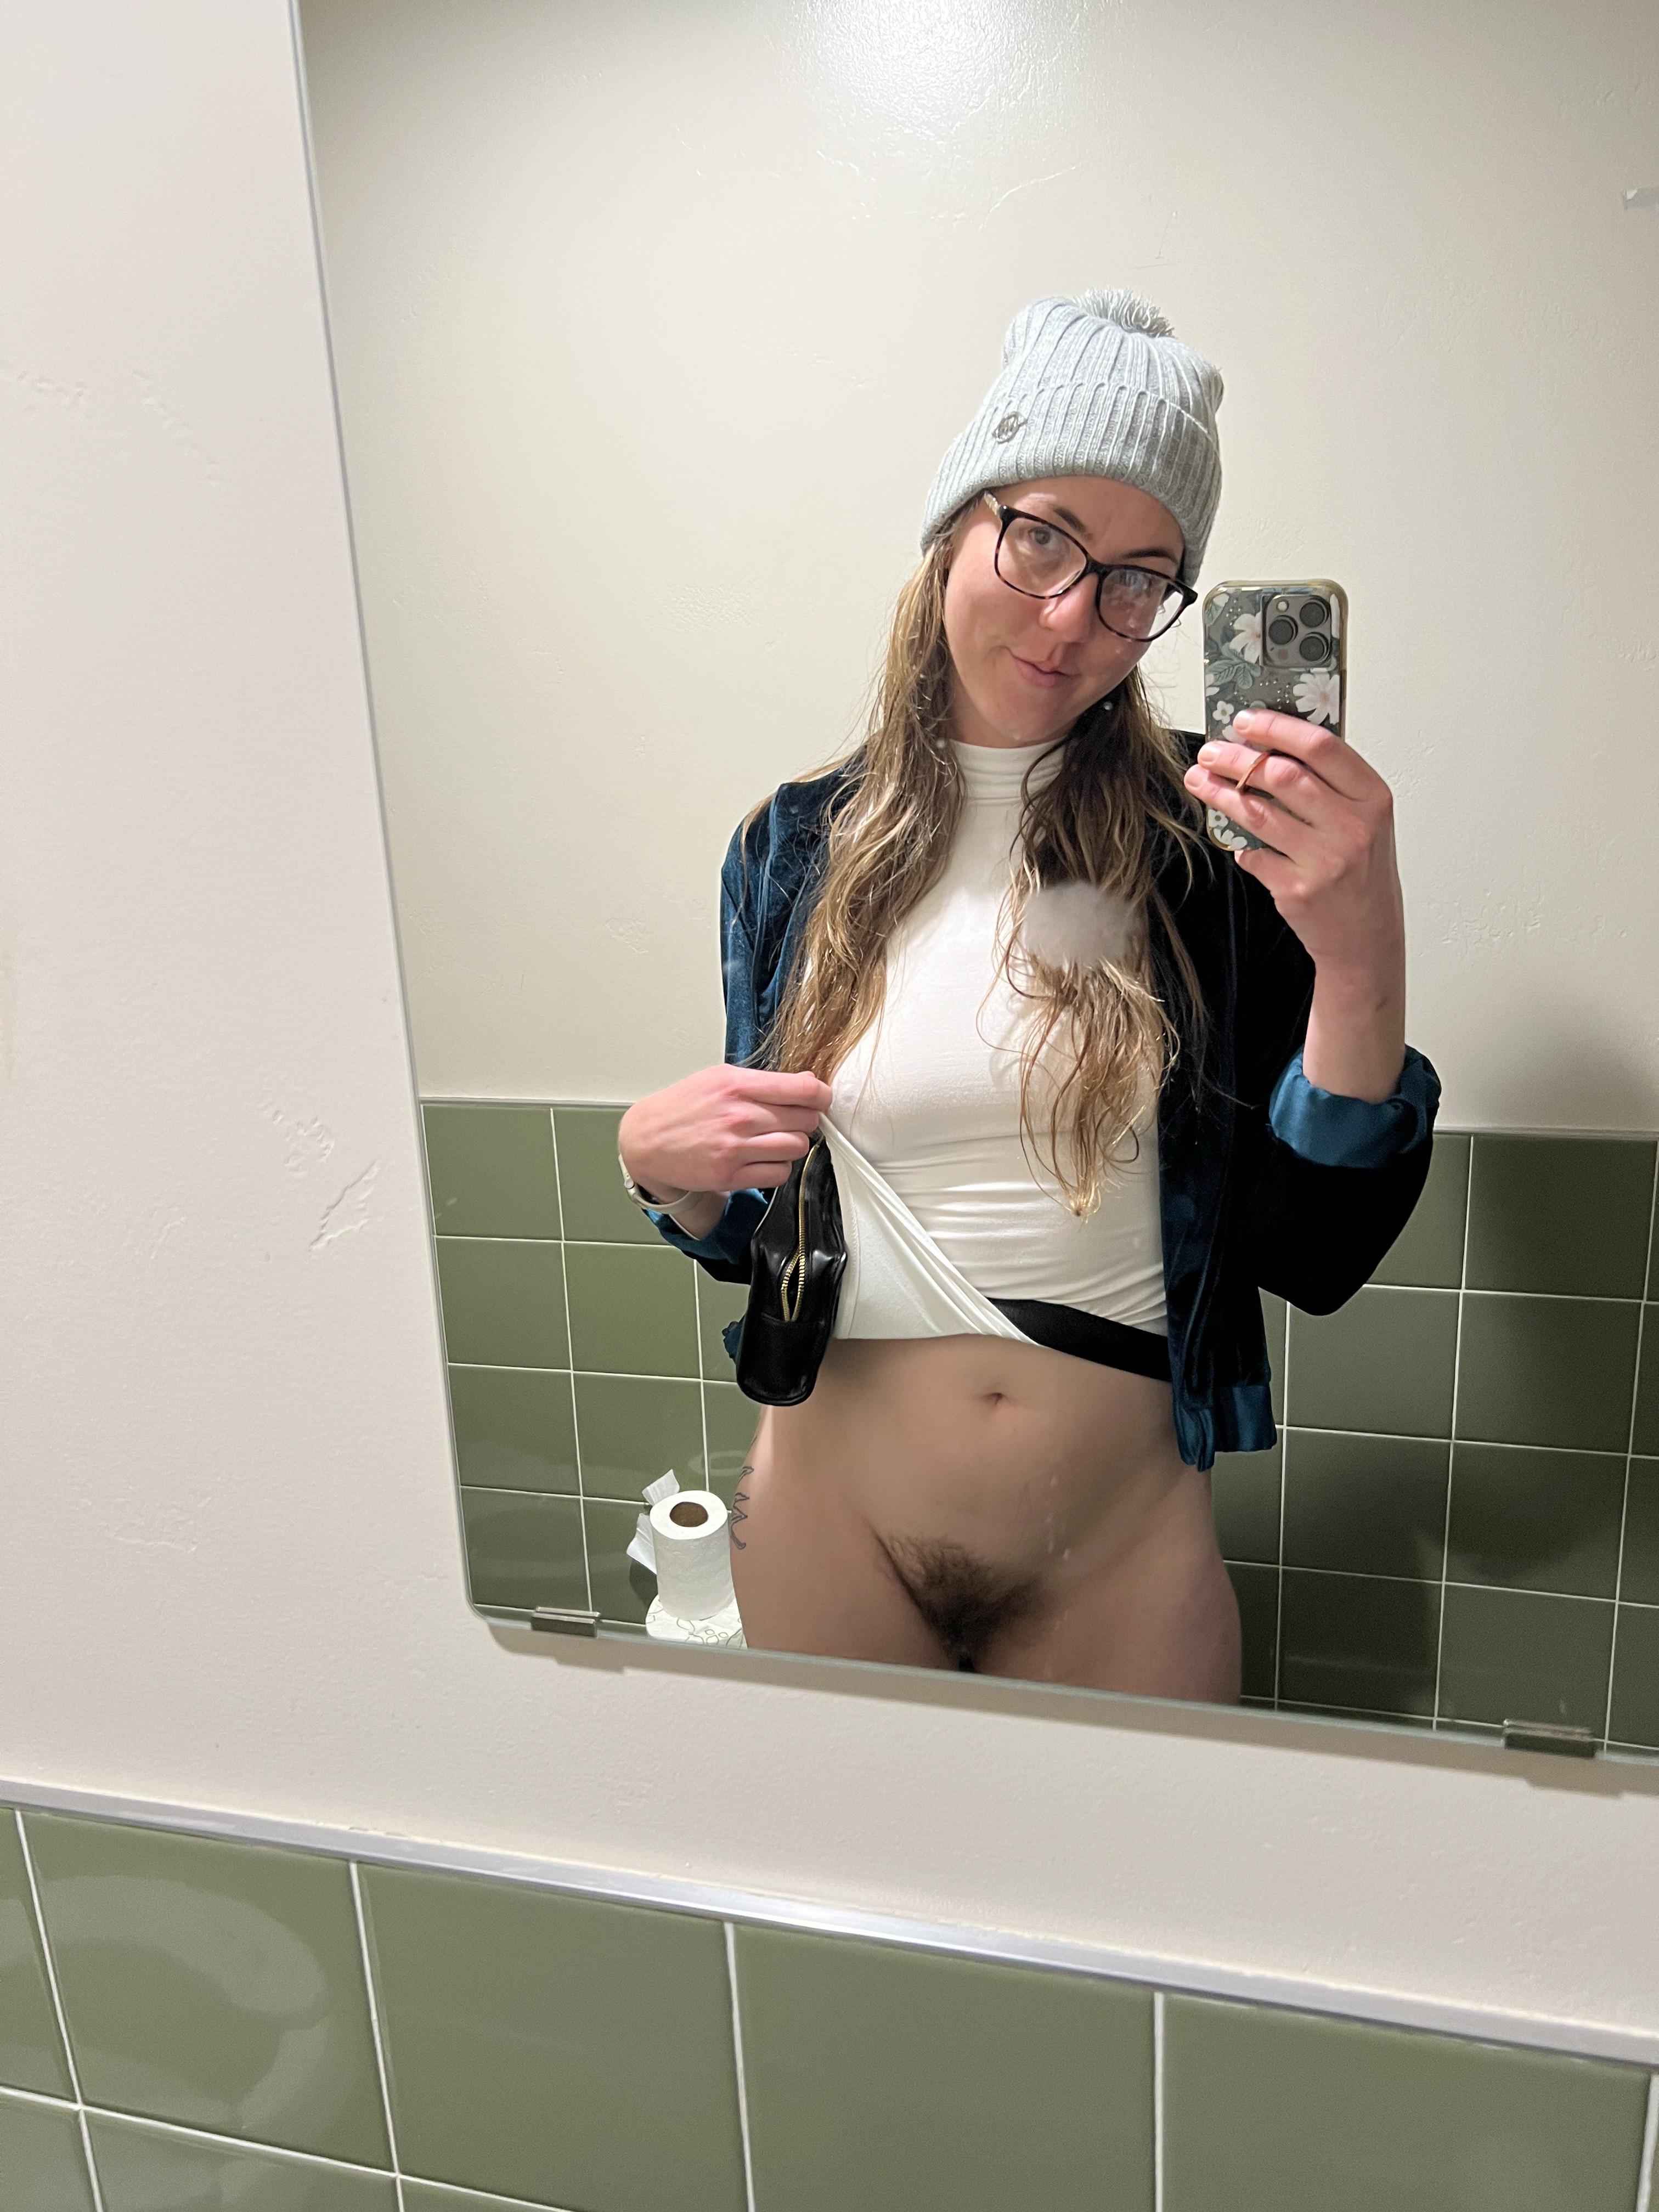 The mirror was ALMOST the perfect height to show my pussy pic